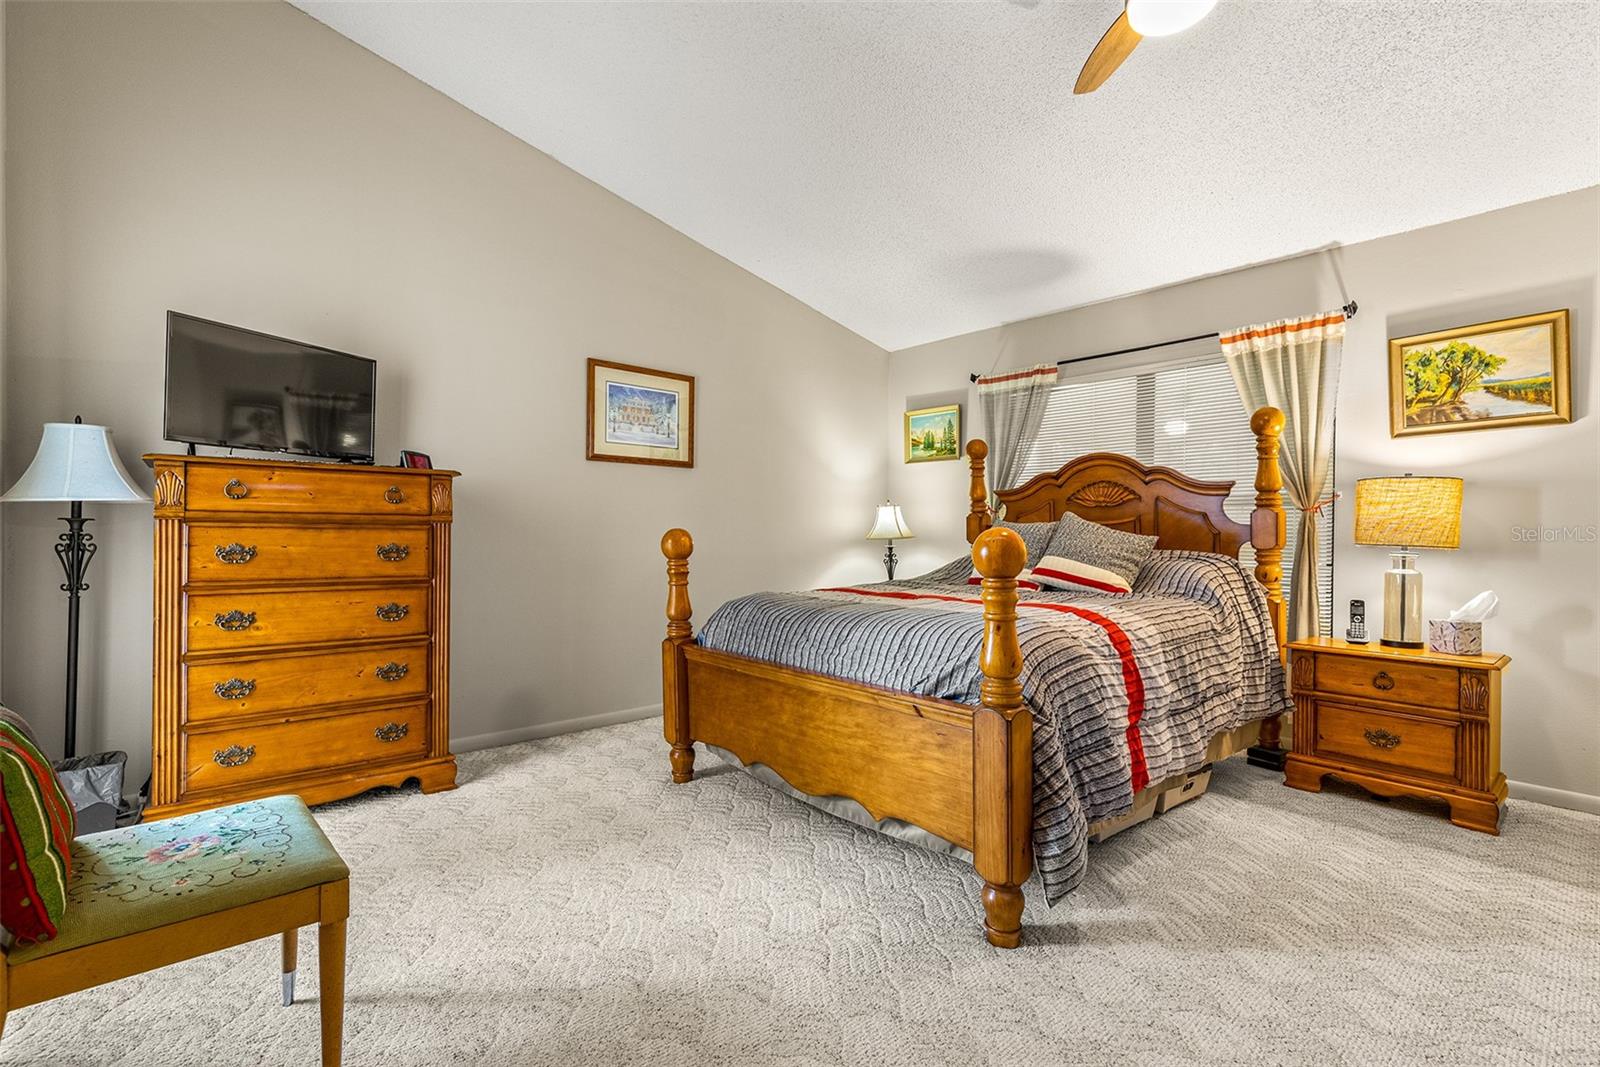 Large primary bedroom with neutral colors, carpeting and includes a en-suite bathroom that has been fully remodeled and large walk-in closet.